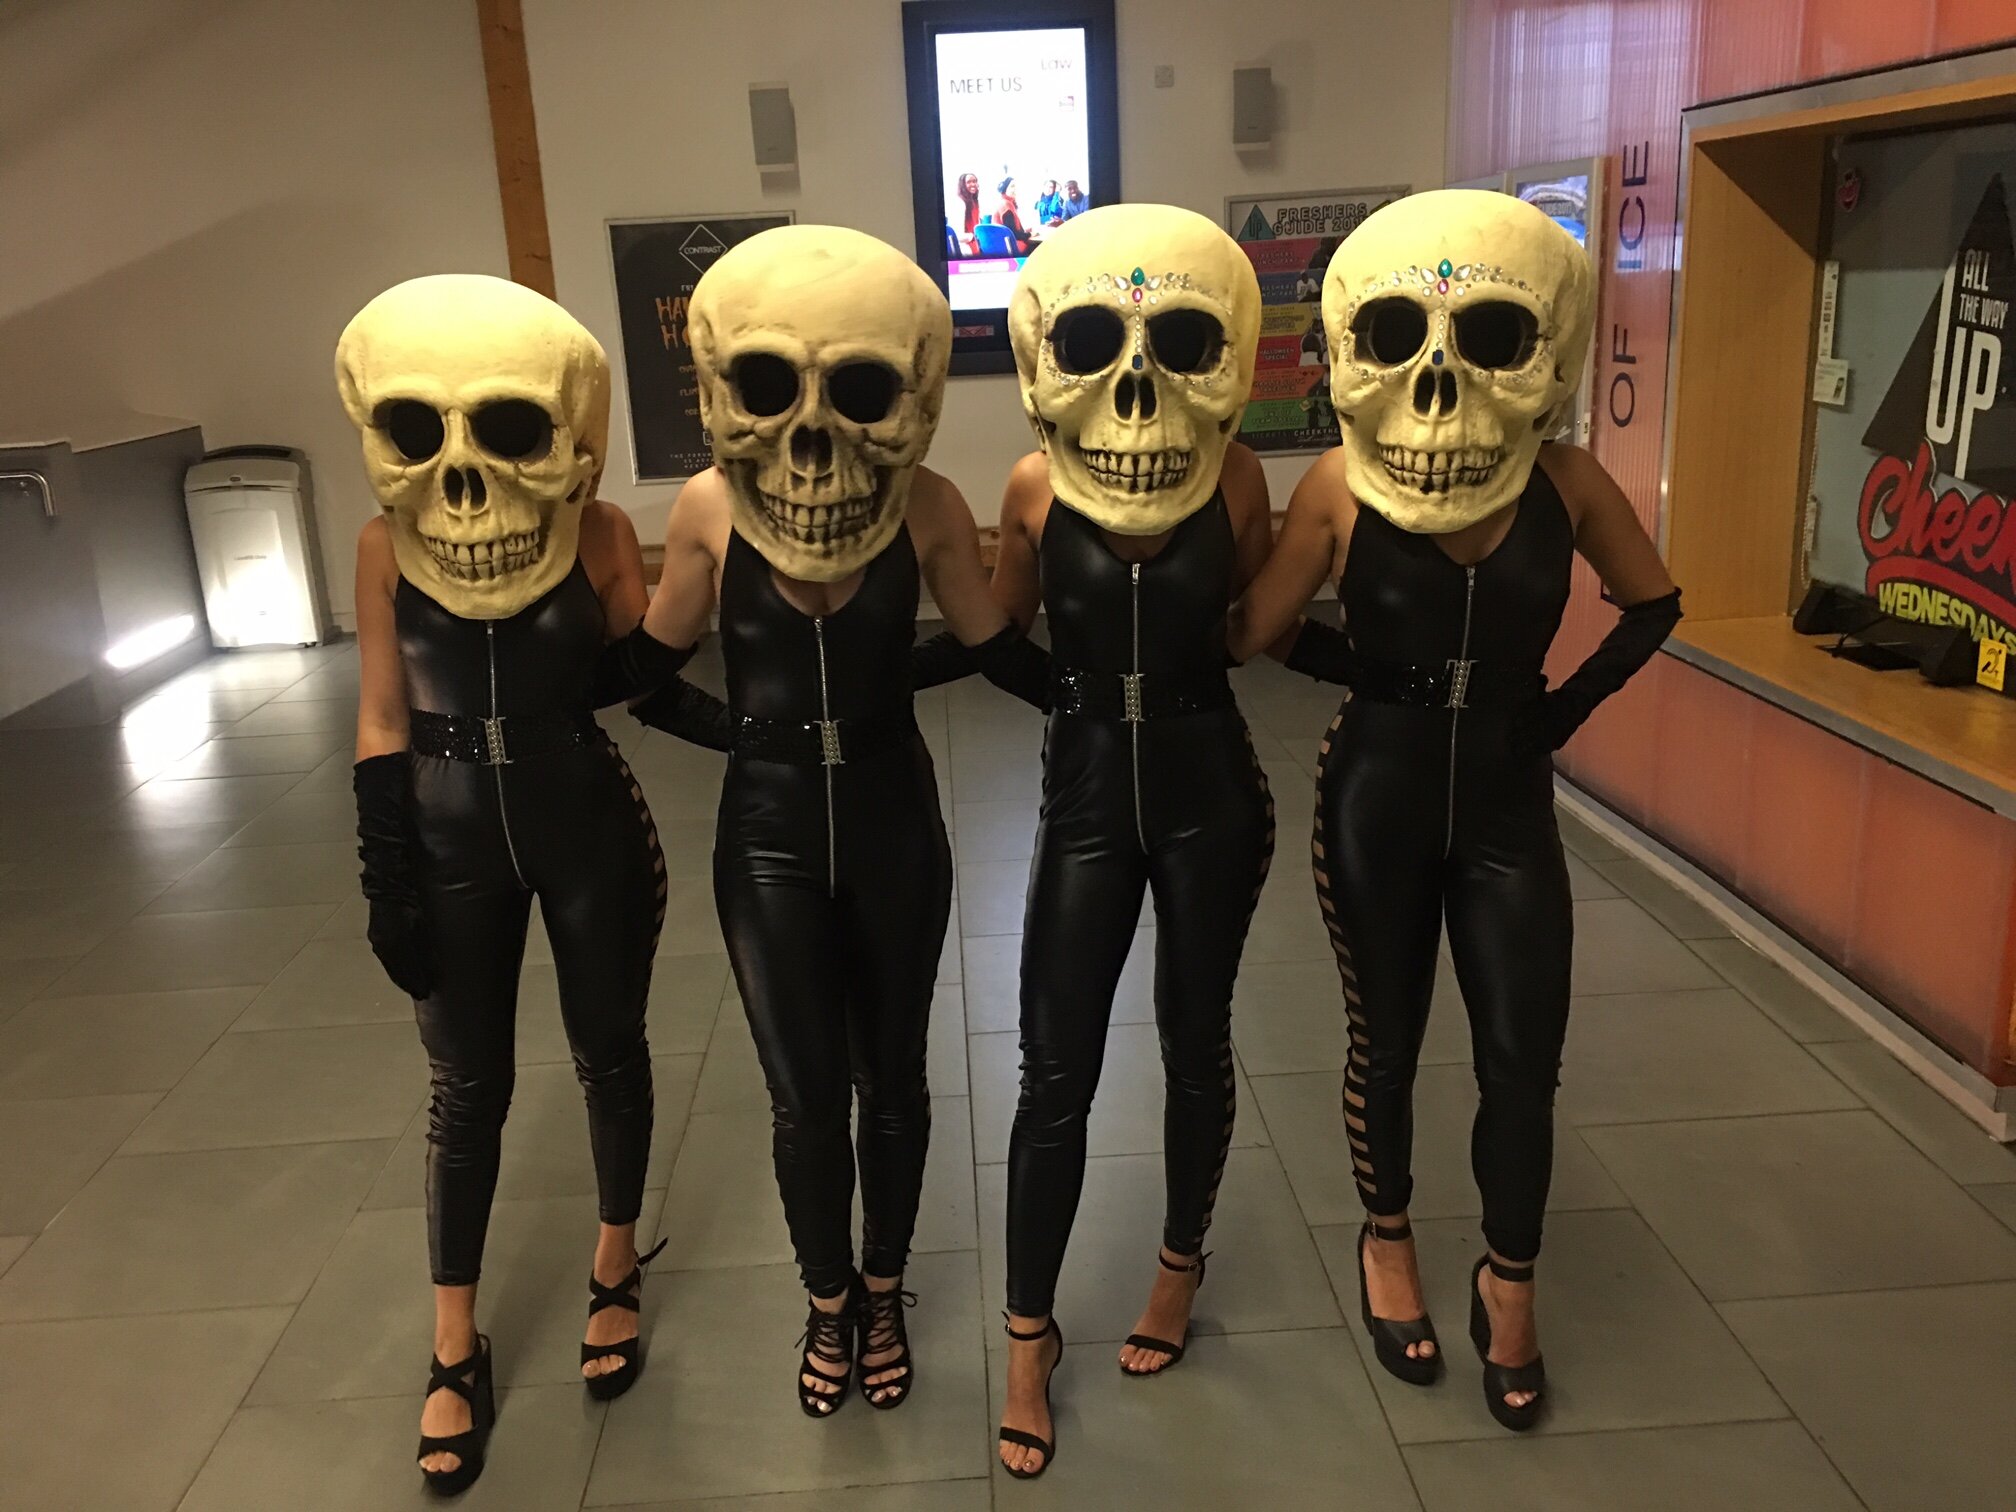 Skull Heads at live event